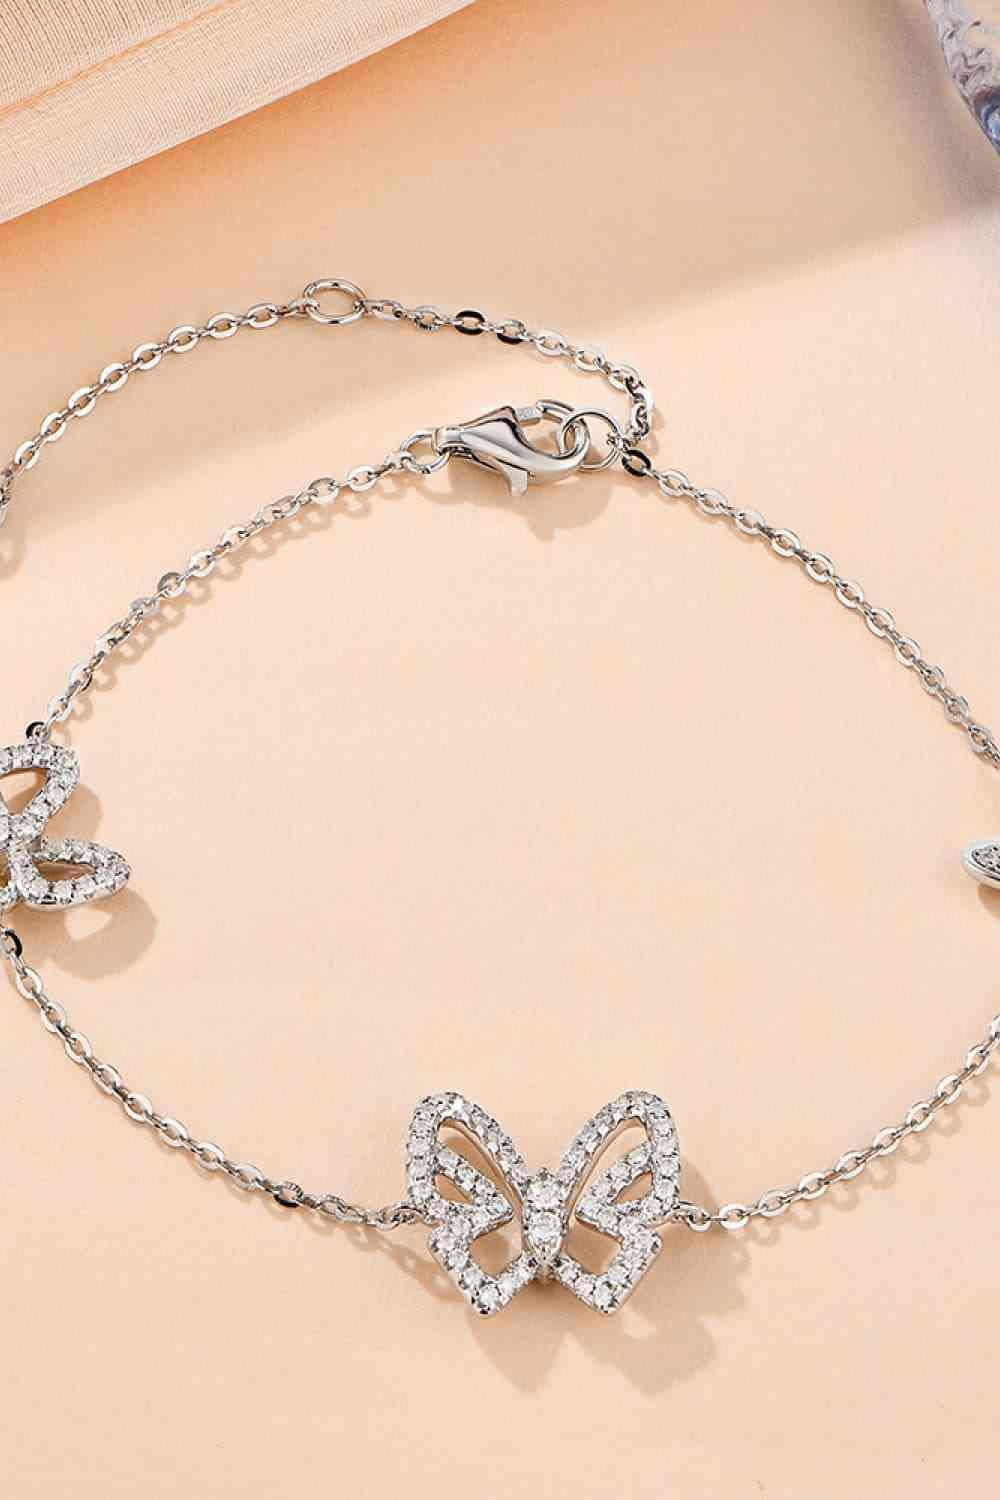 a silver bracelet with a bow on it